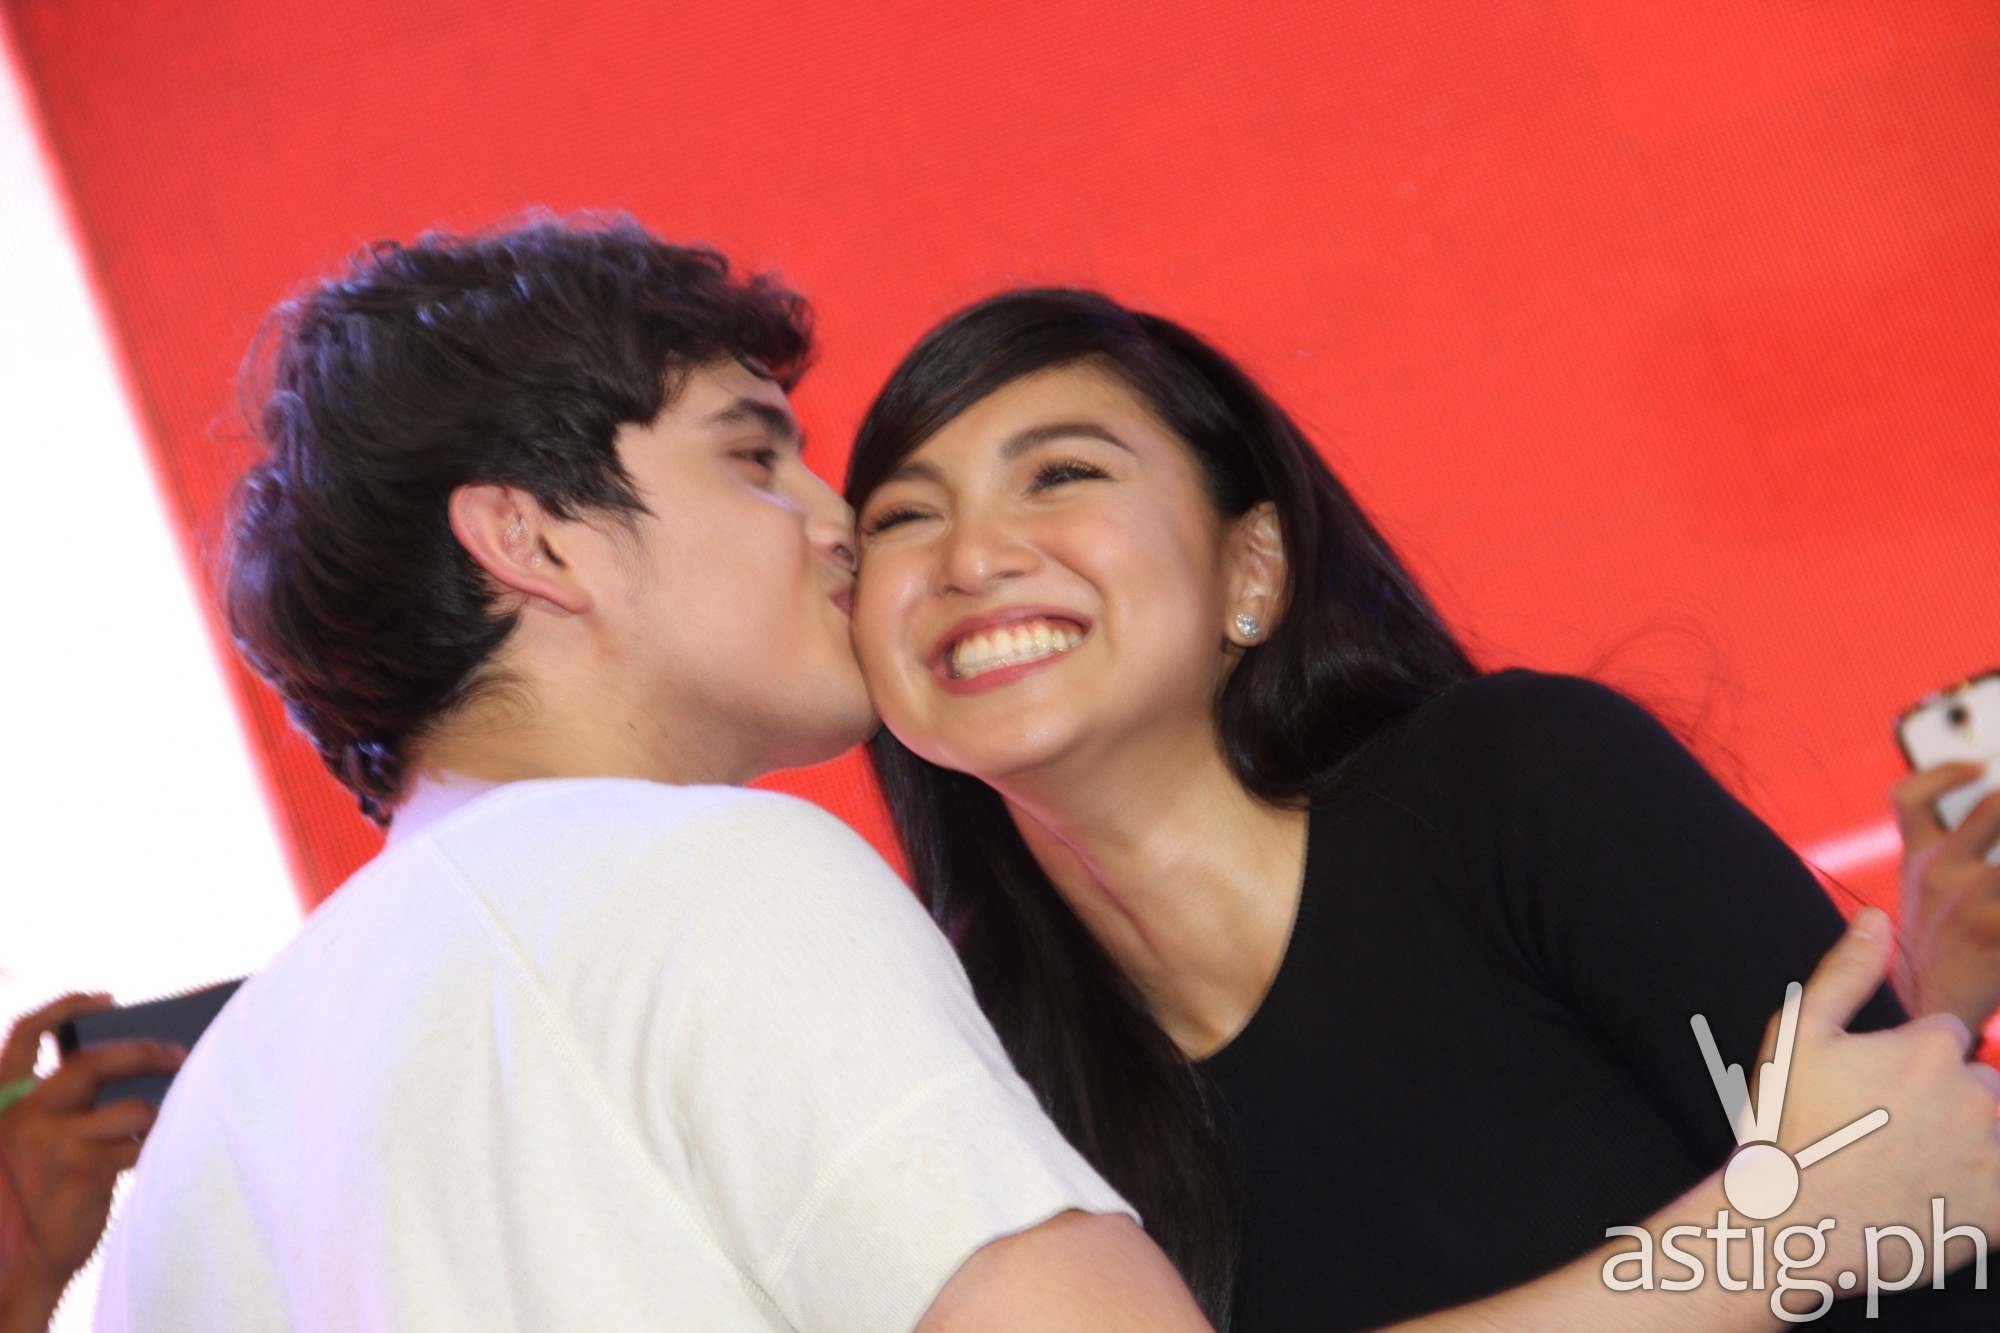 James gives a kiss on the cheek to Nadine due to public demand